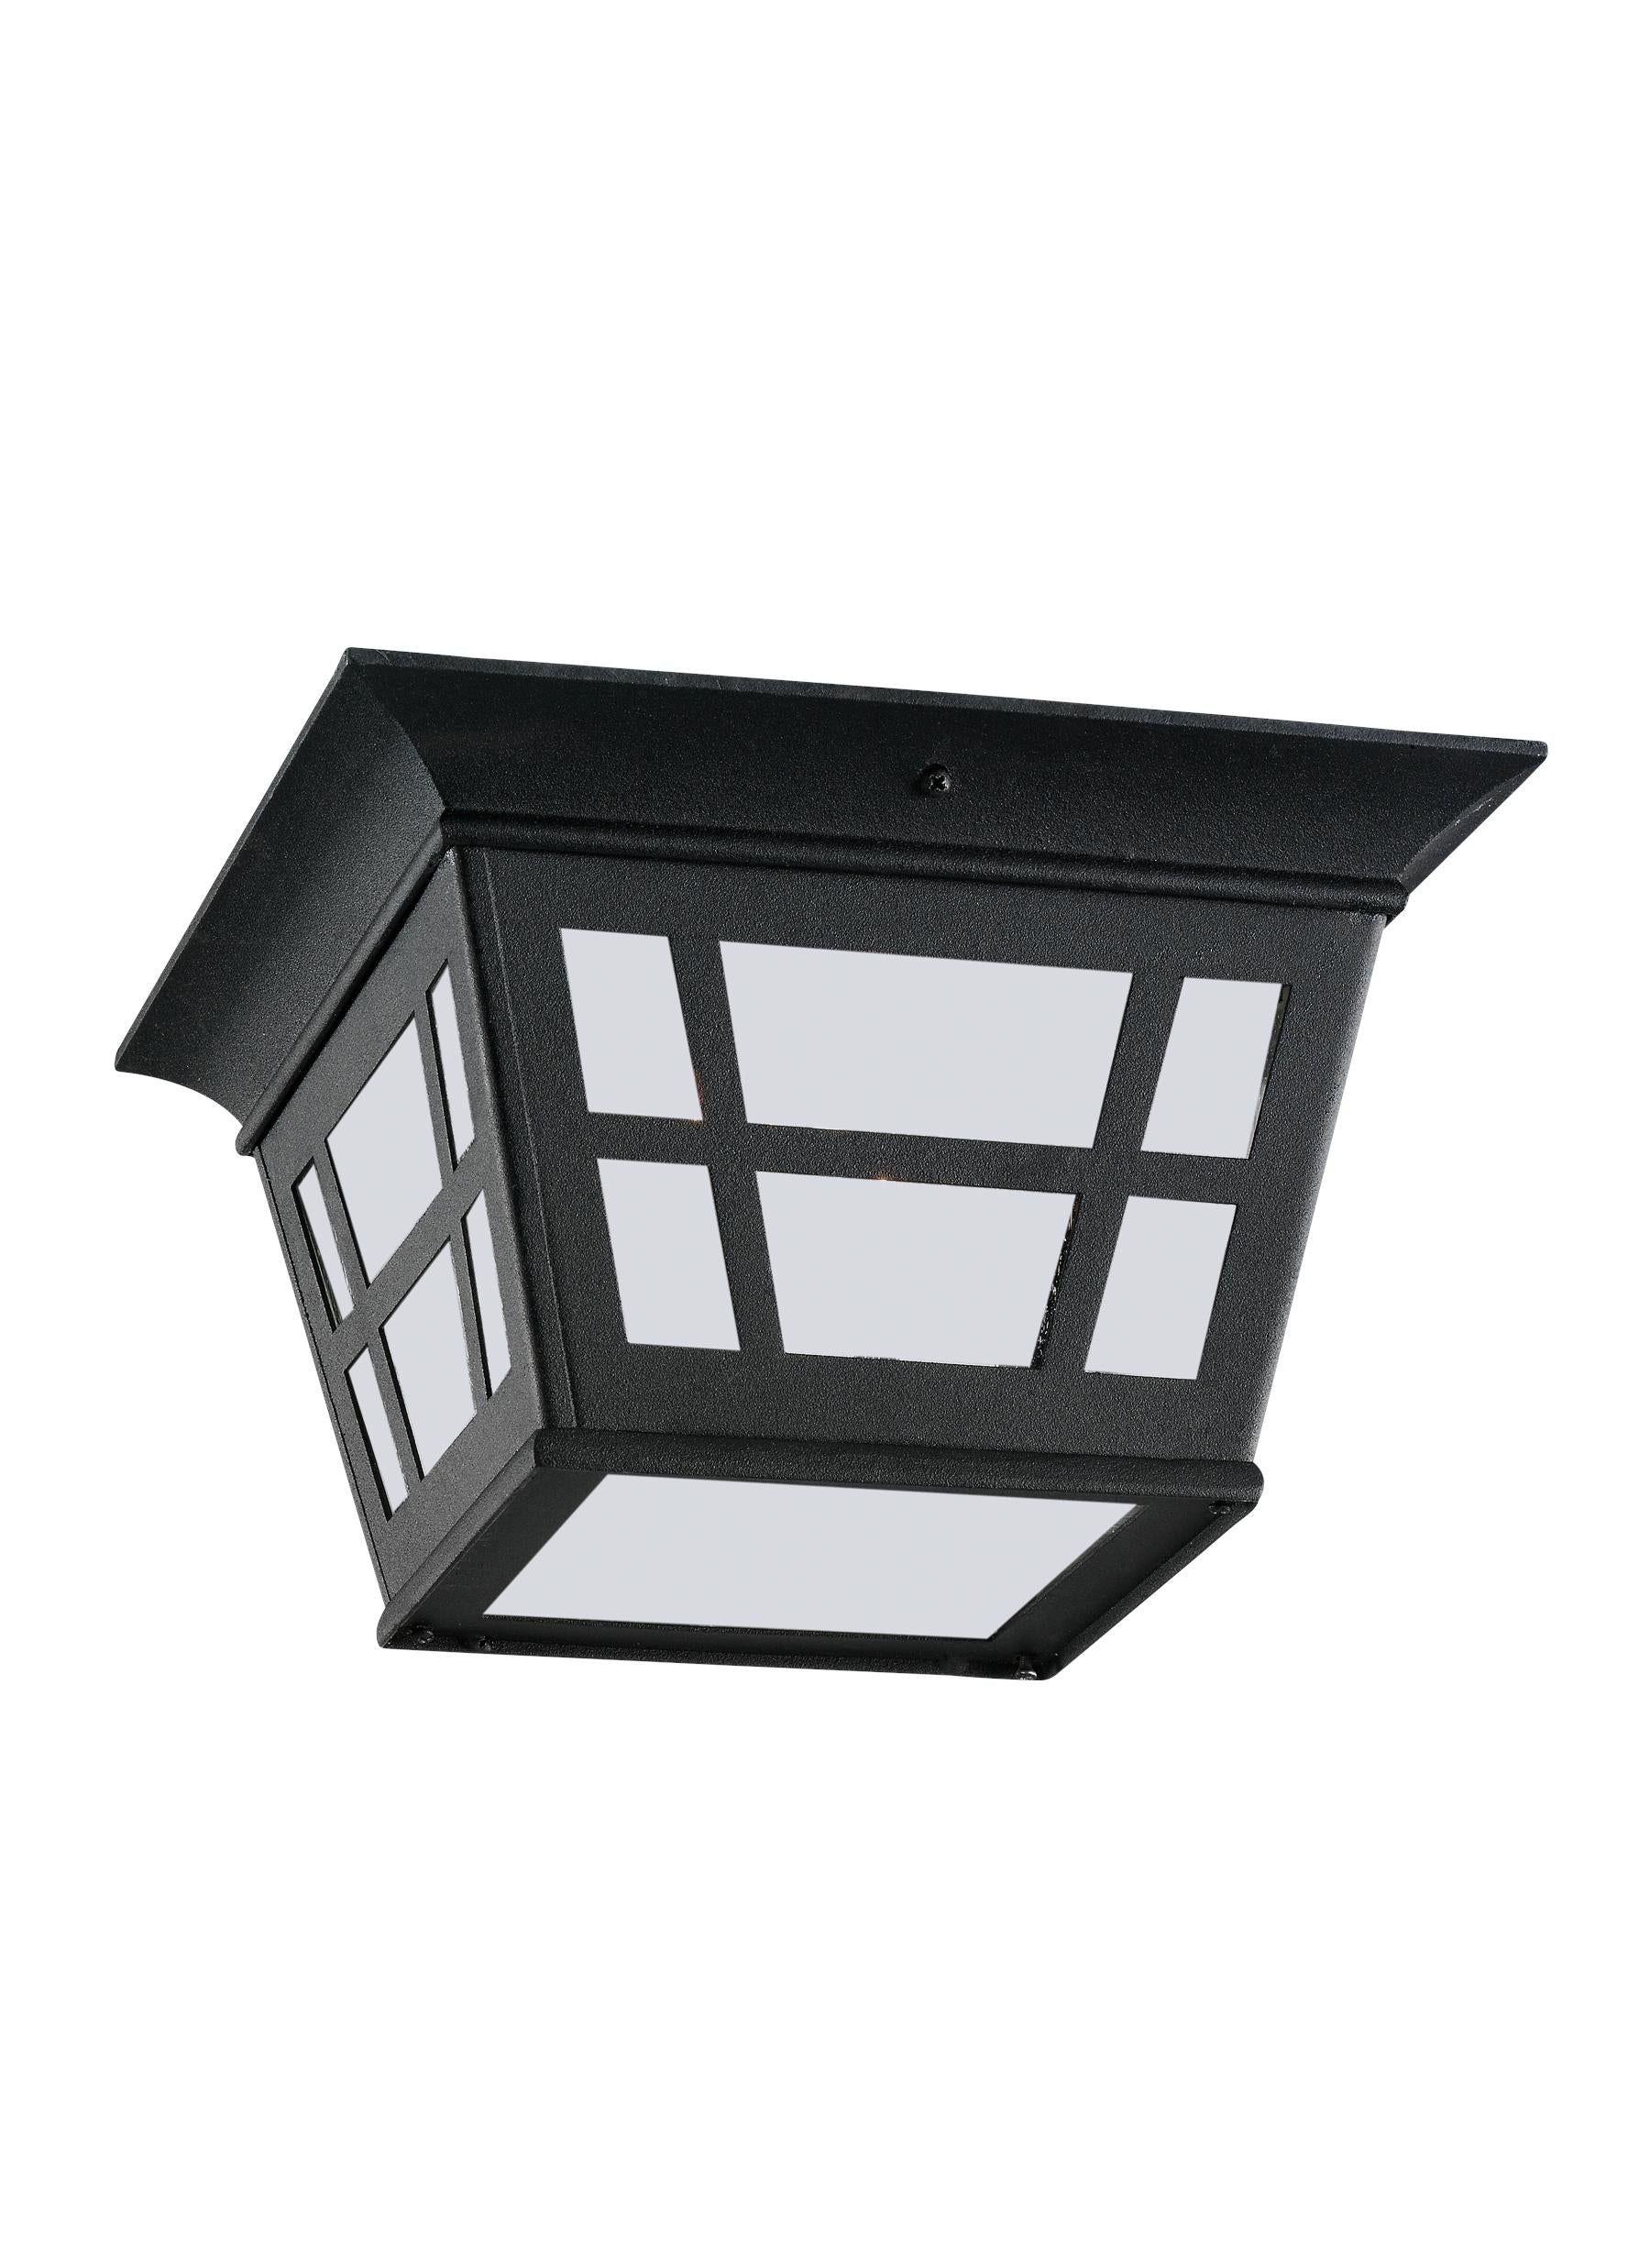 Herrington transitional 2-light outdoor exterior ceiling flush mount in black finish with etched white glass panels